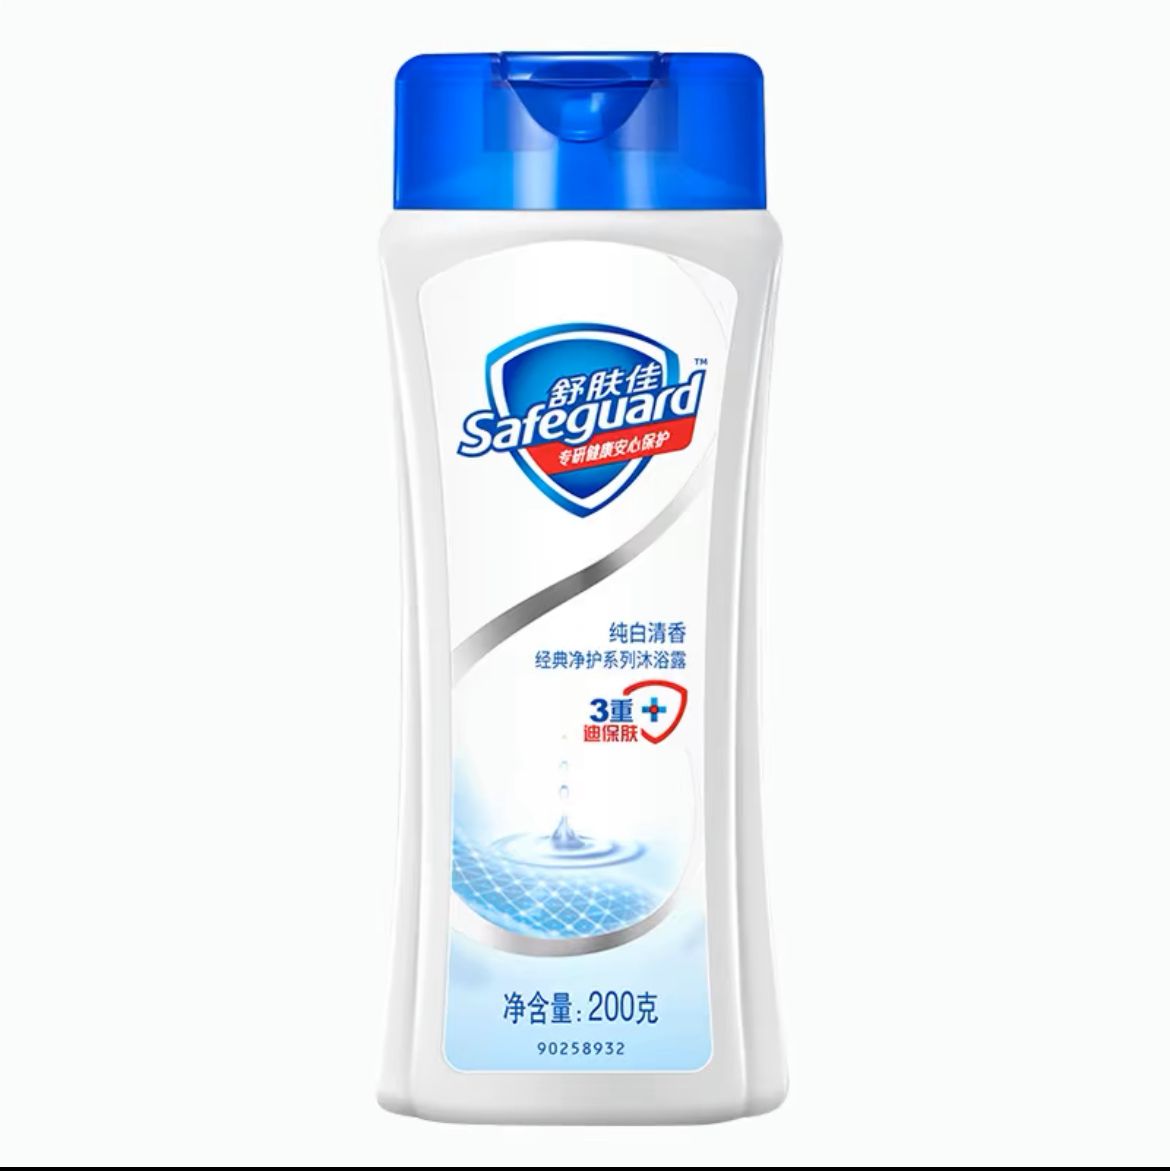 Safeguard Rich Foam Body Wash Pure White Faint Scent Refreshing Protects Skin 200g/Small Bottle